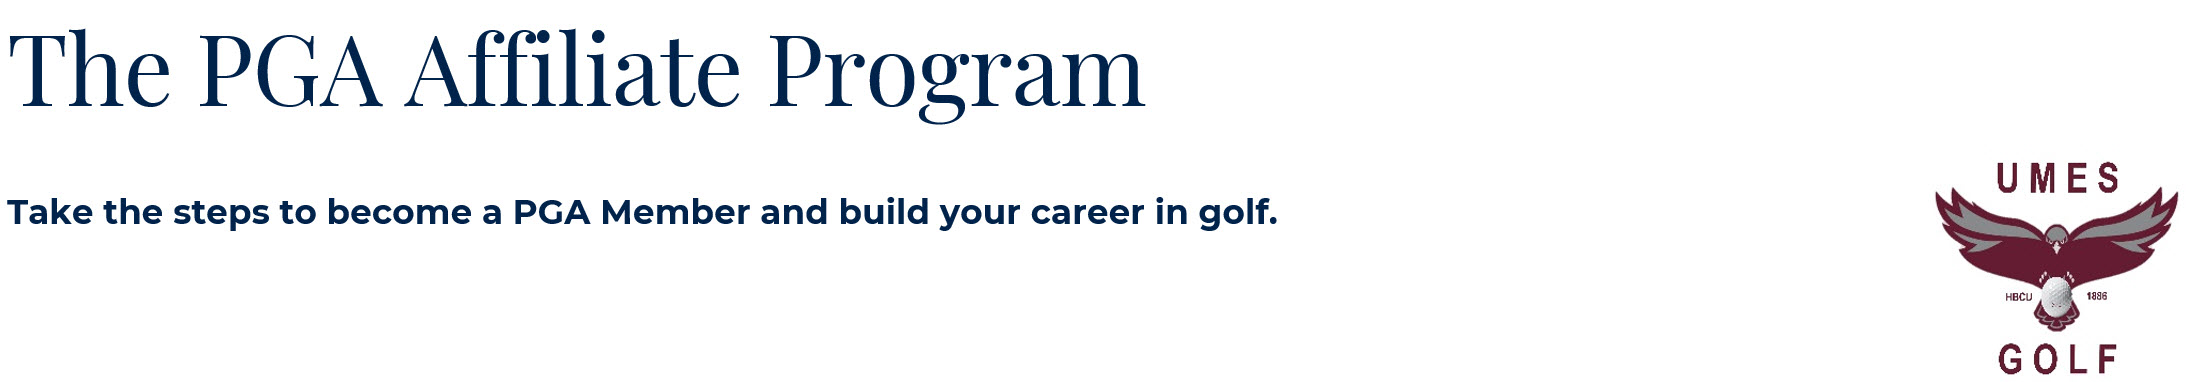 The PGA Affiliate Program

Take the steps to become a PGA Member and build your career in golf.